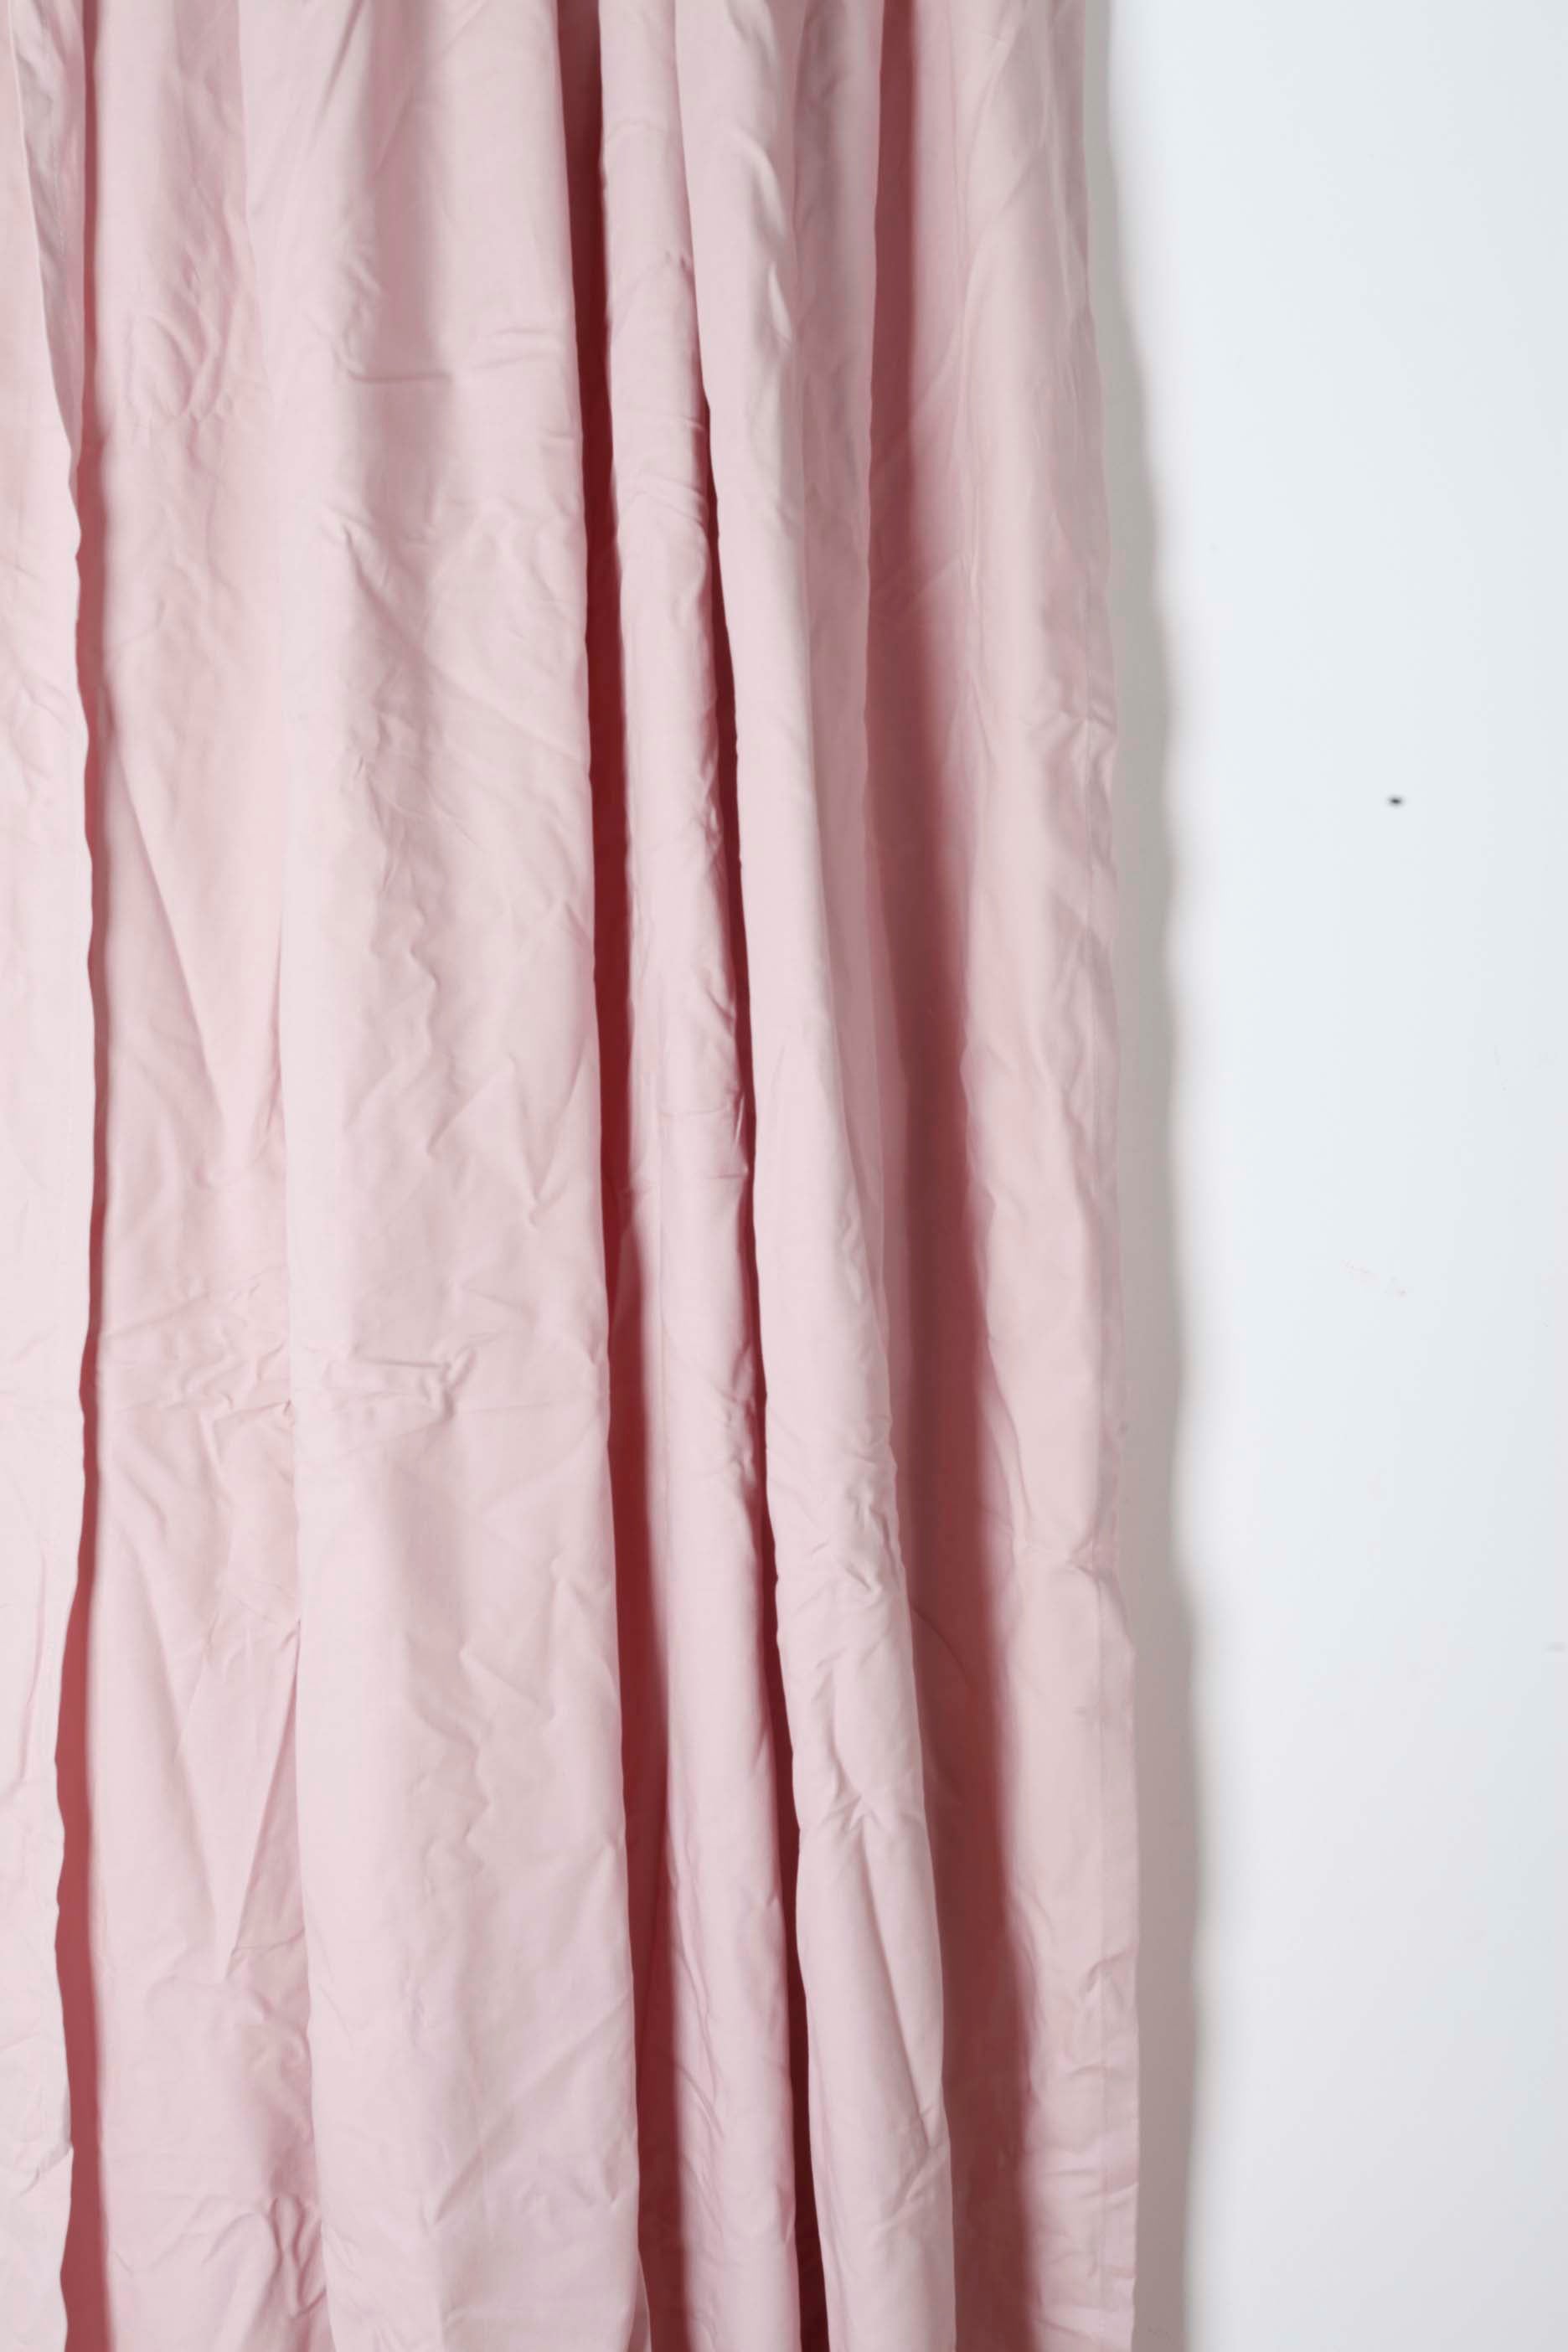 Pair of Light Pink Cotton Curtains